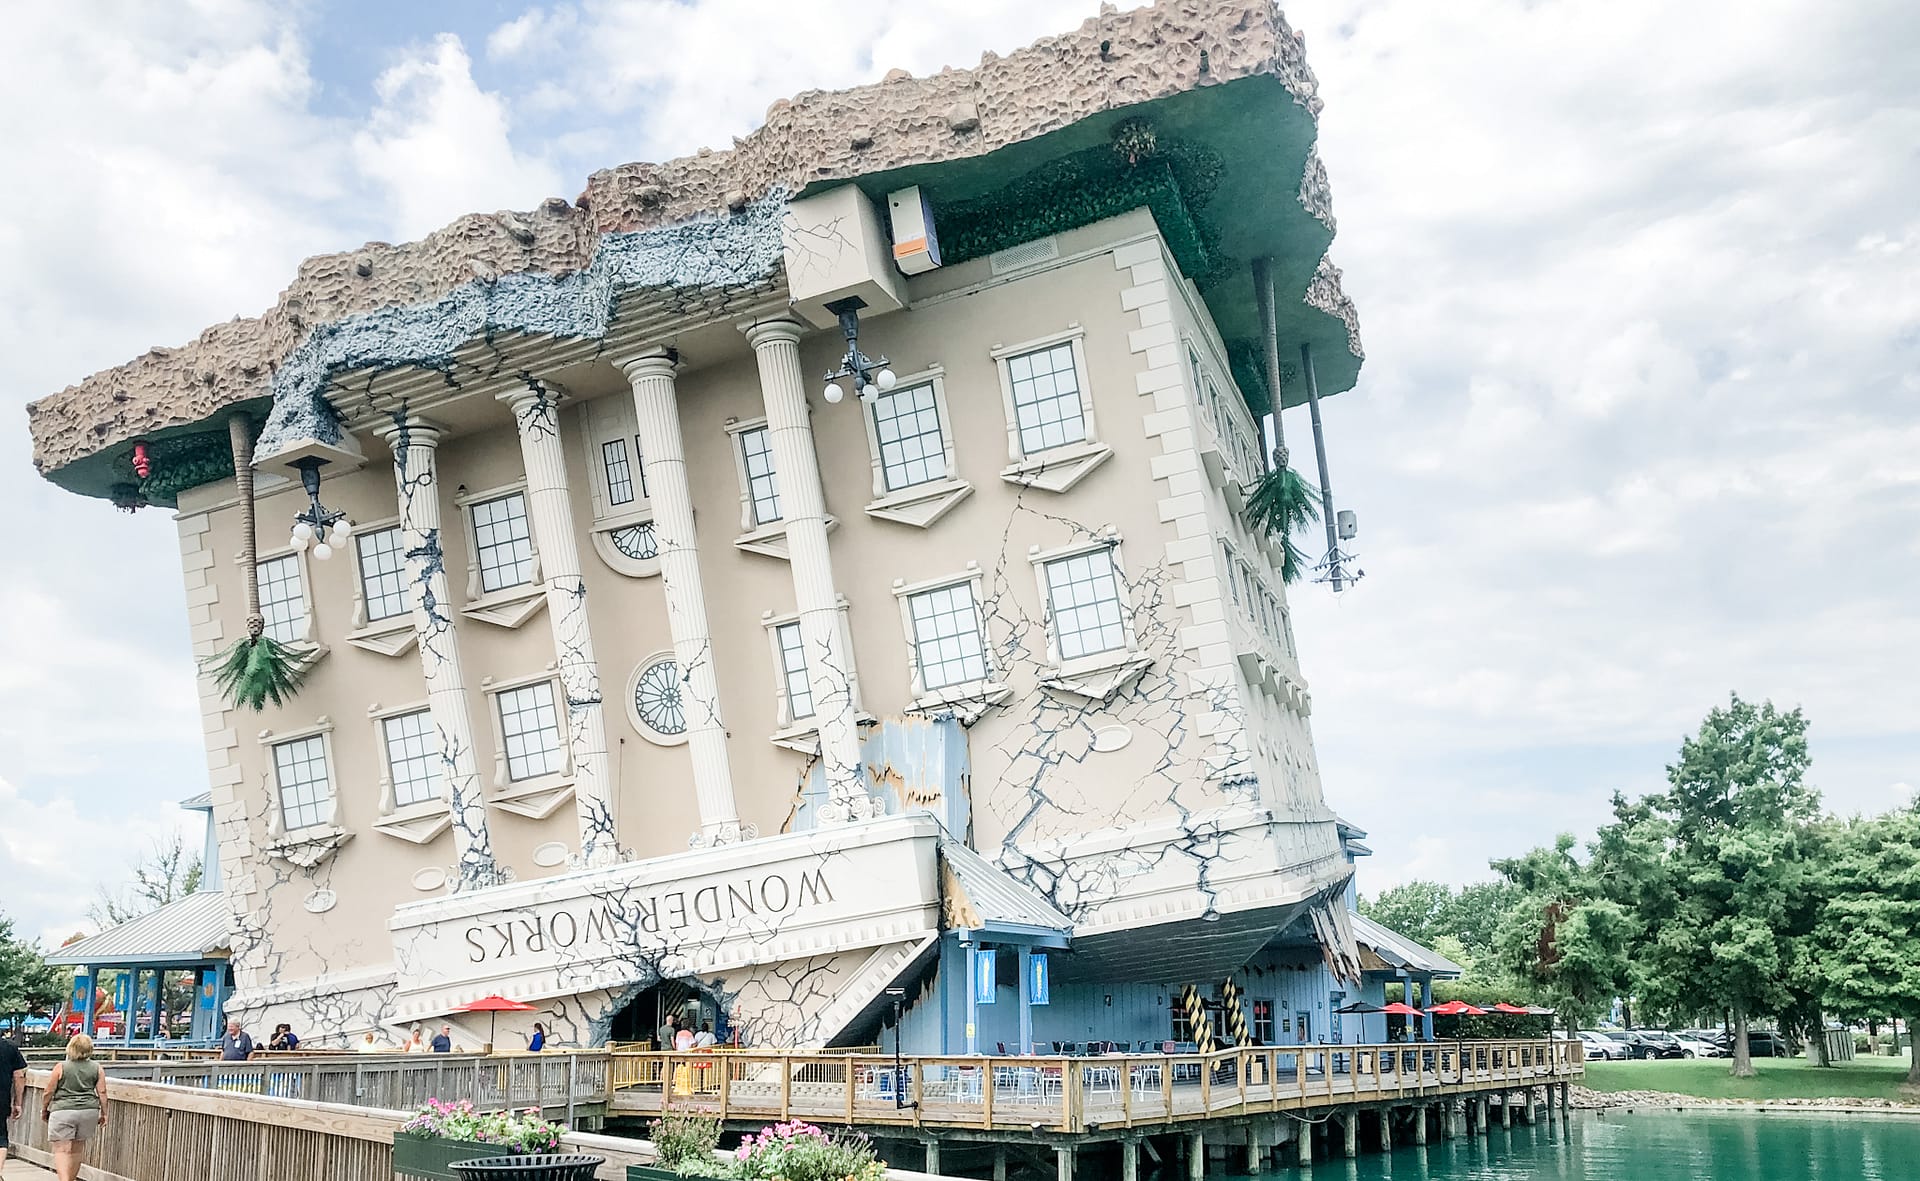 Exterior picture of the Wonder Works upside down house.